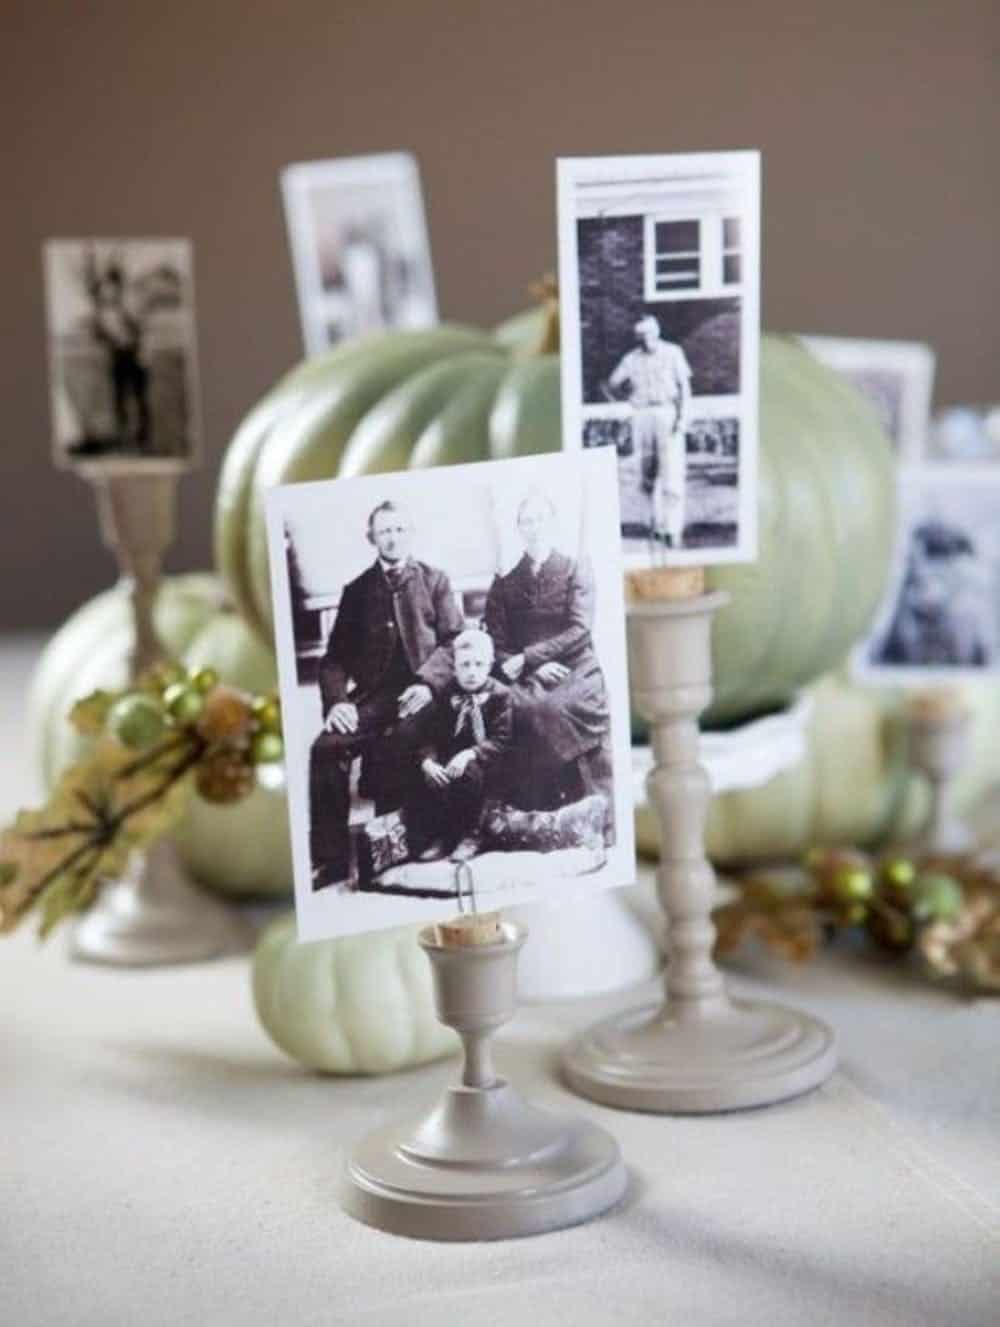 Diy candlestick photo holders from wine corks